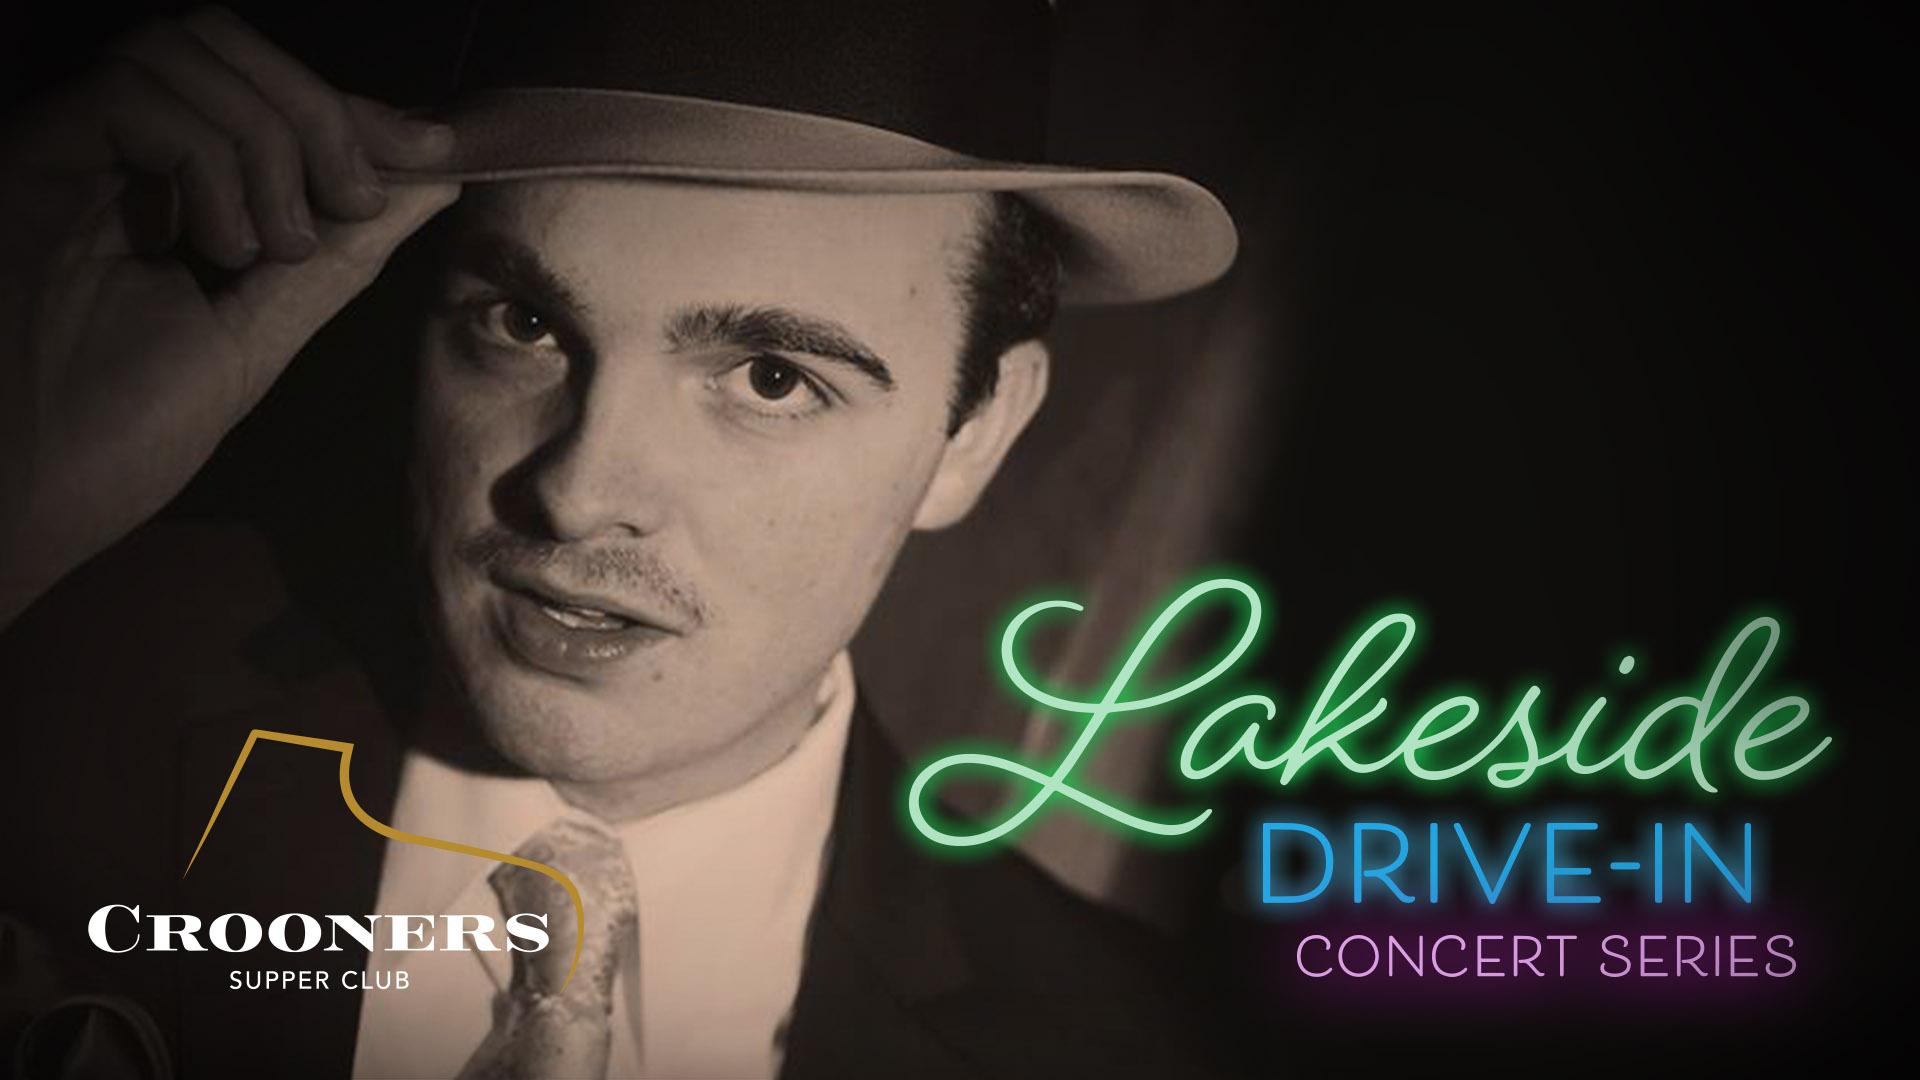 Sinatra! with Andrew Walesch Big Band - Drive-In Concert